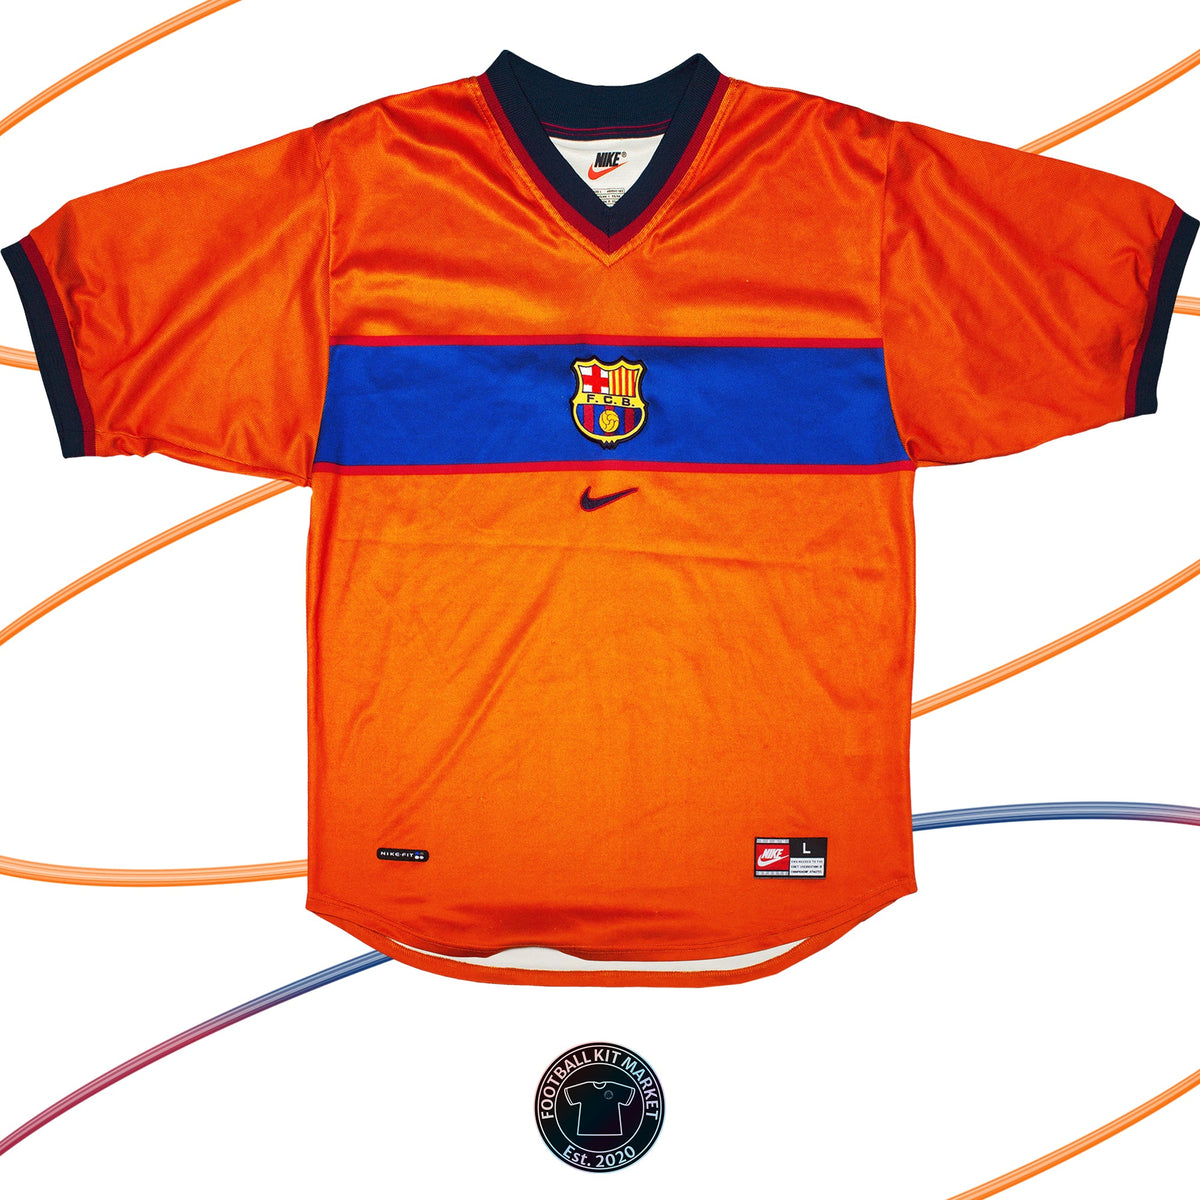 Genuine BARCELONA Away (1998-1999) - NIKE (L) - Product Image from Football Kit Market